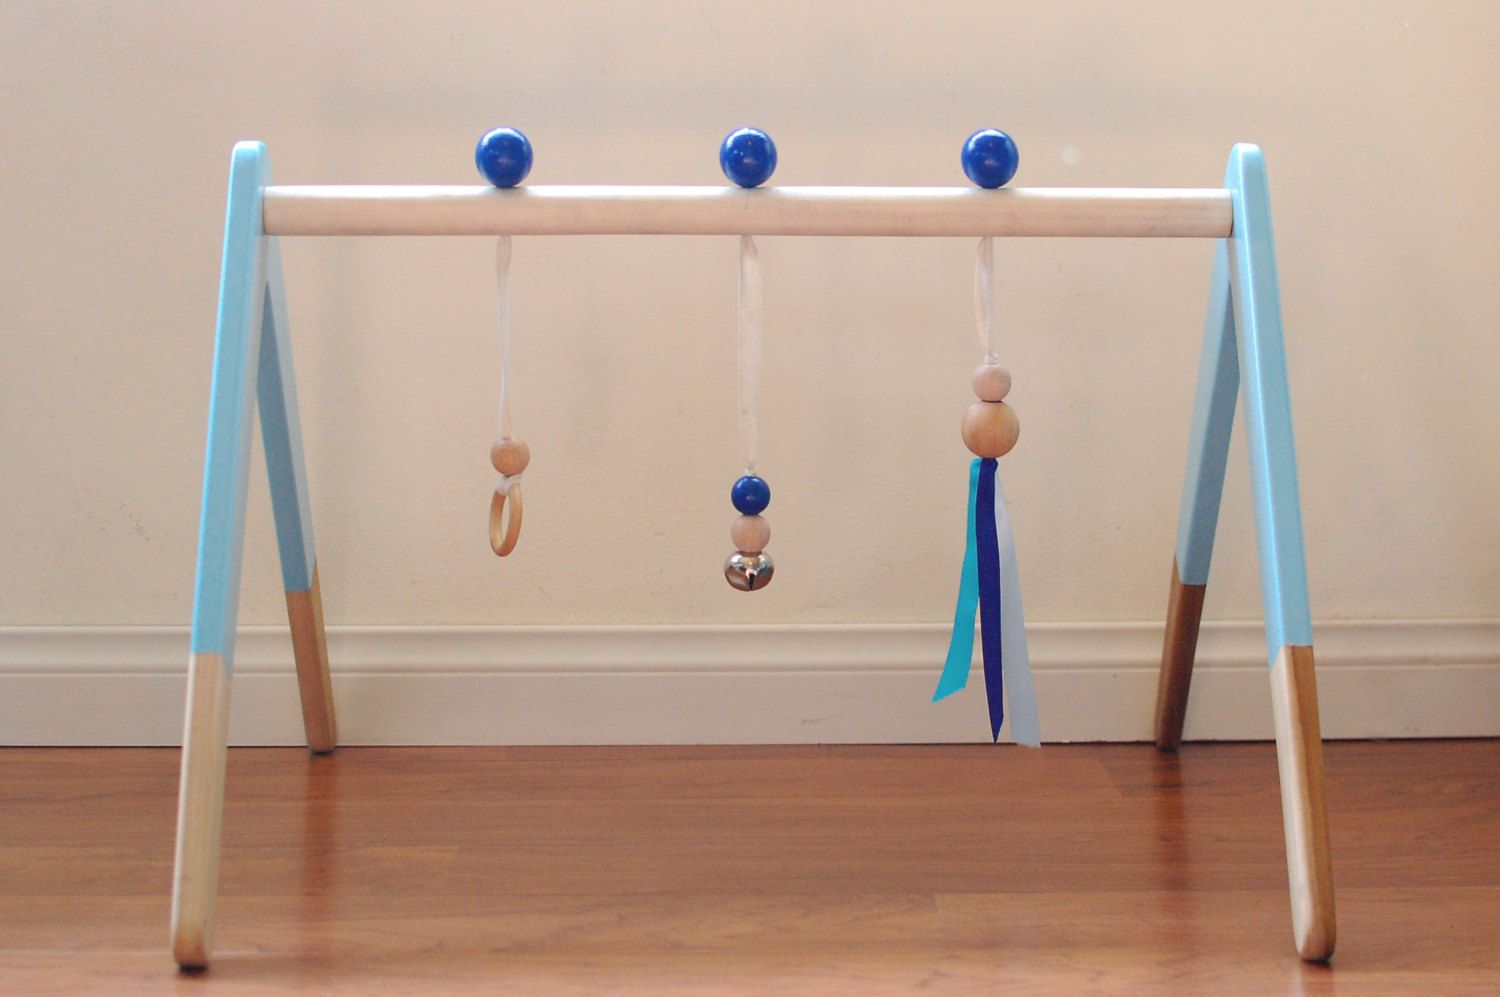 Small Life Studio's wooden baby play gym on Etsy